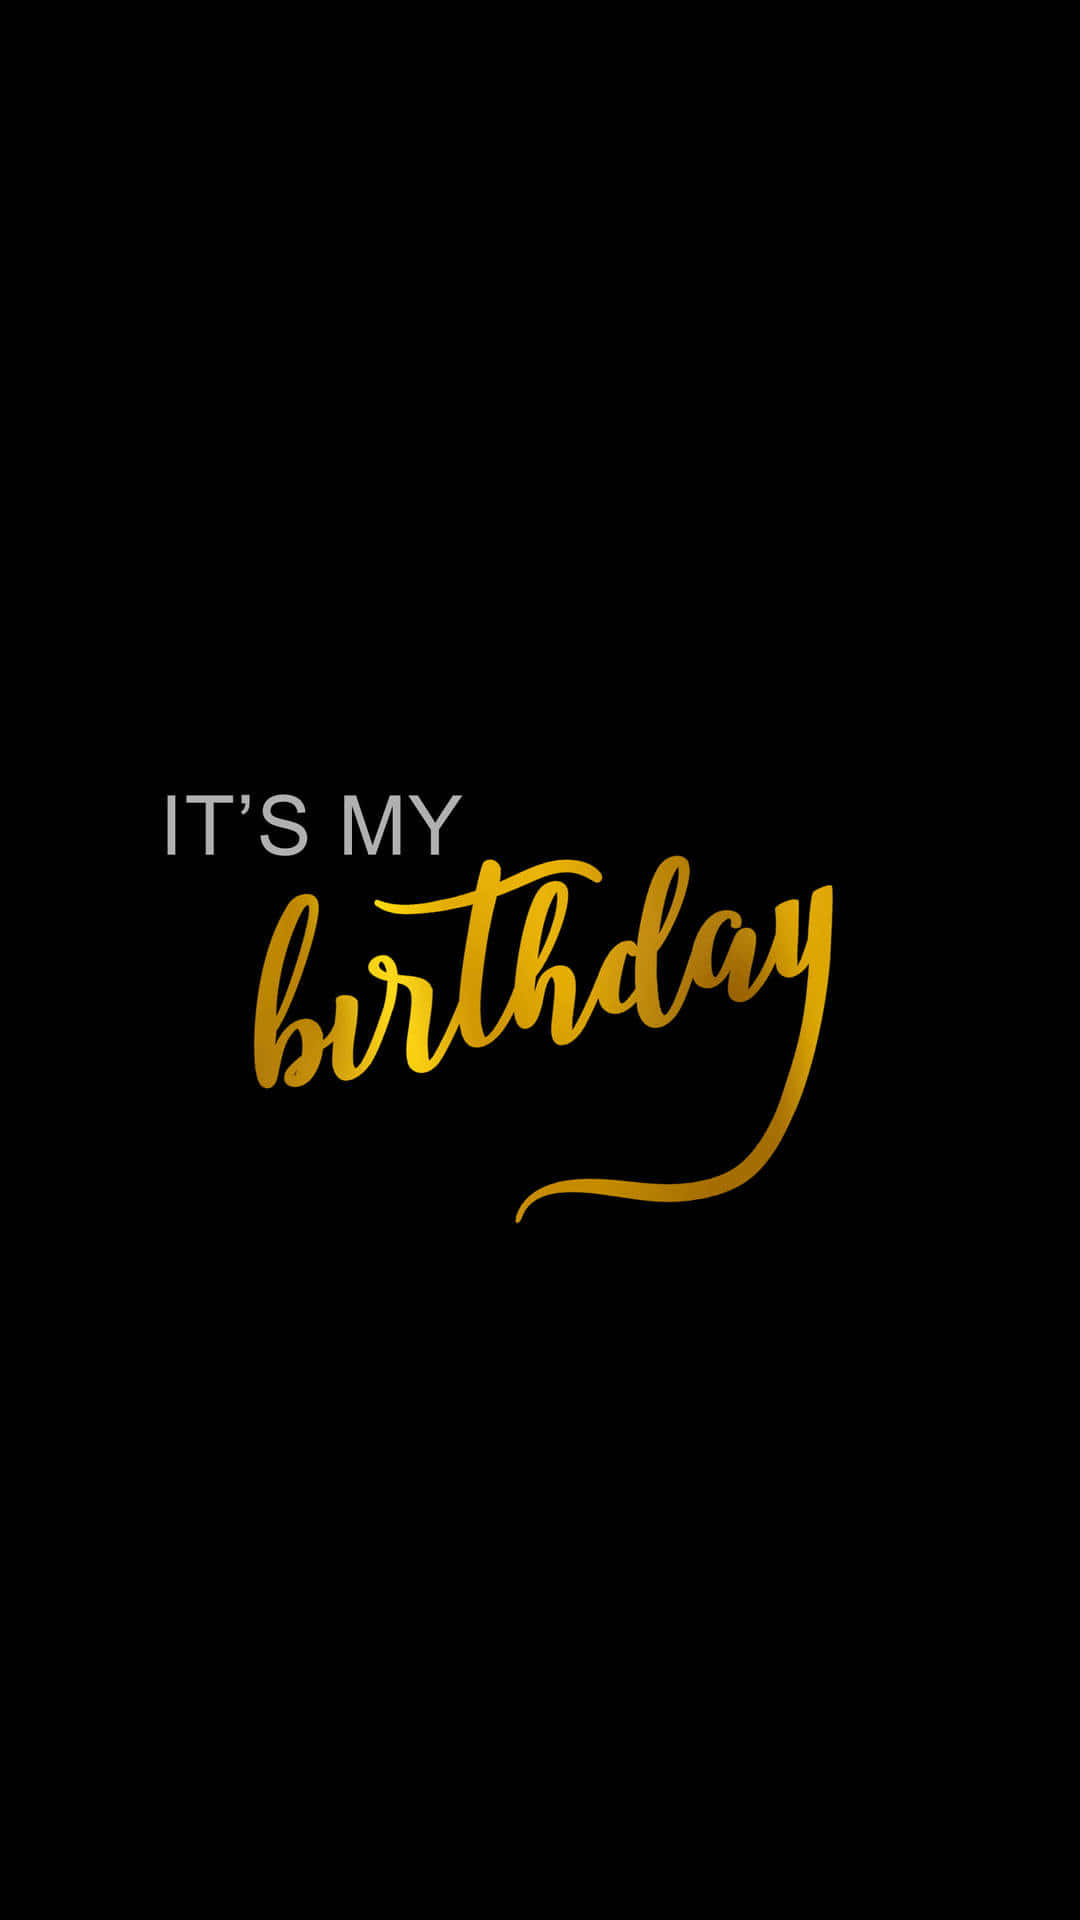 Gold Text In Black It Is My Birthday Wallpaper